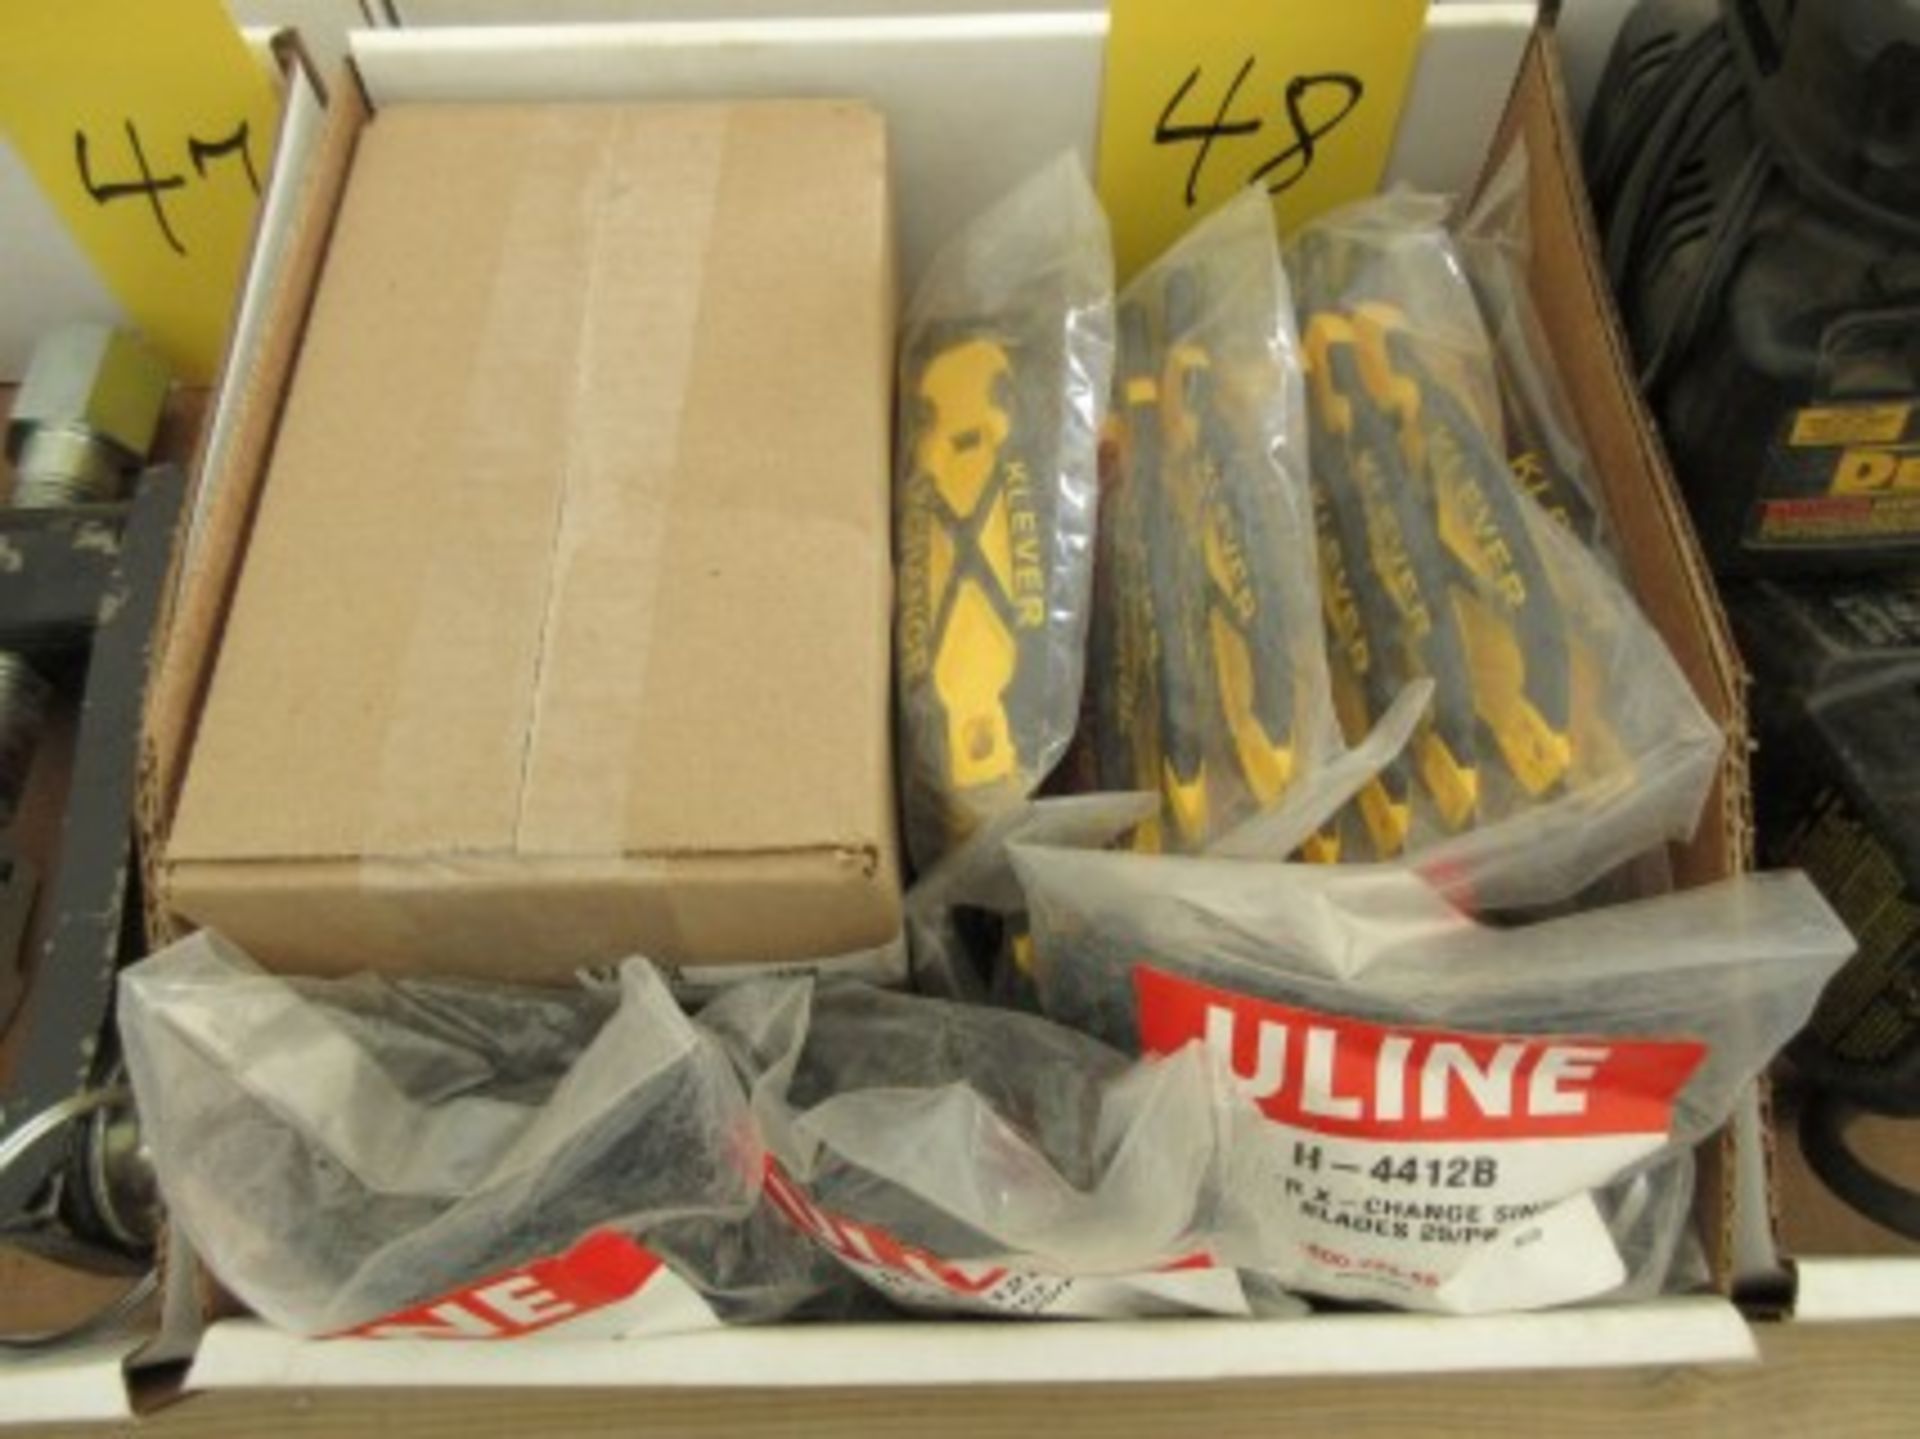 5 packages plus 1 case of Cleaver single use safety knives